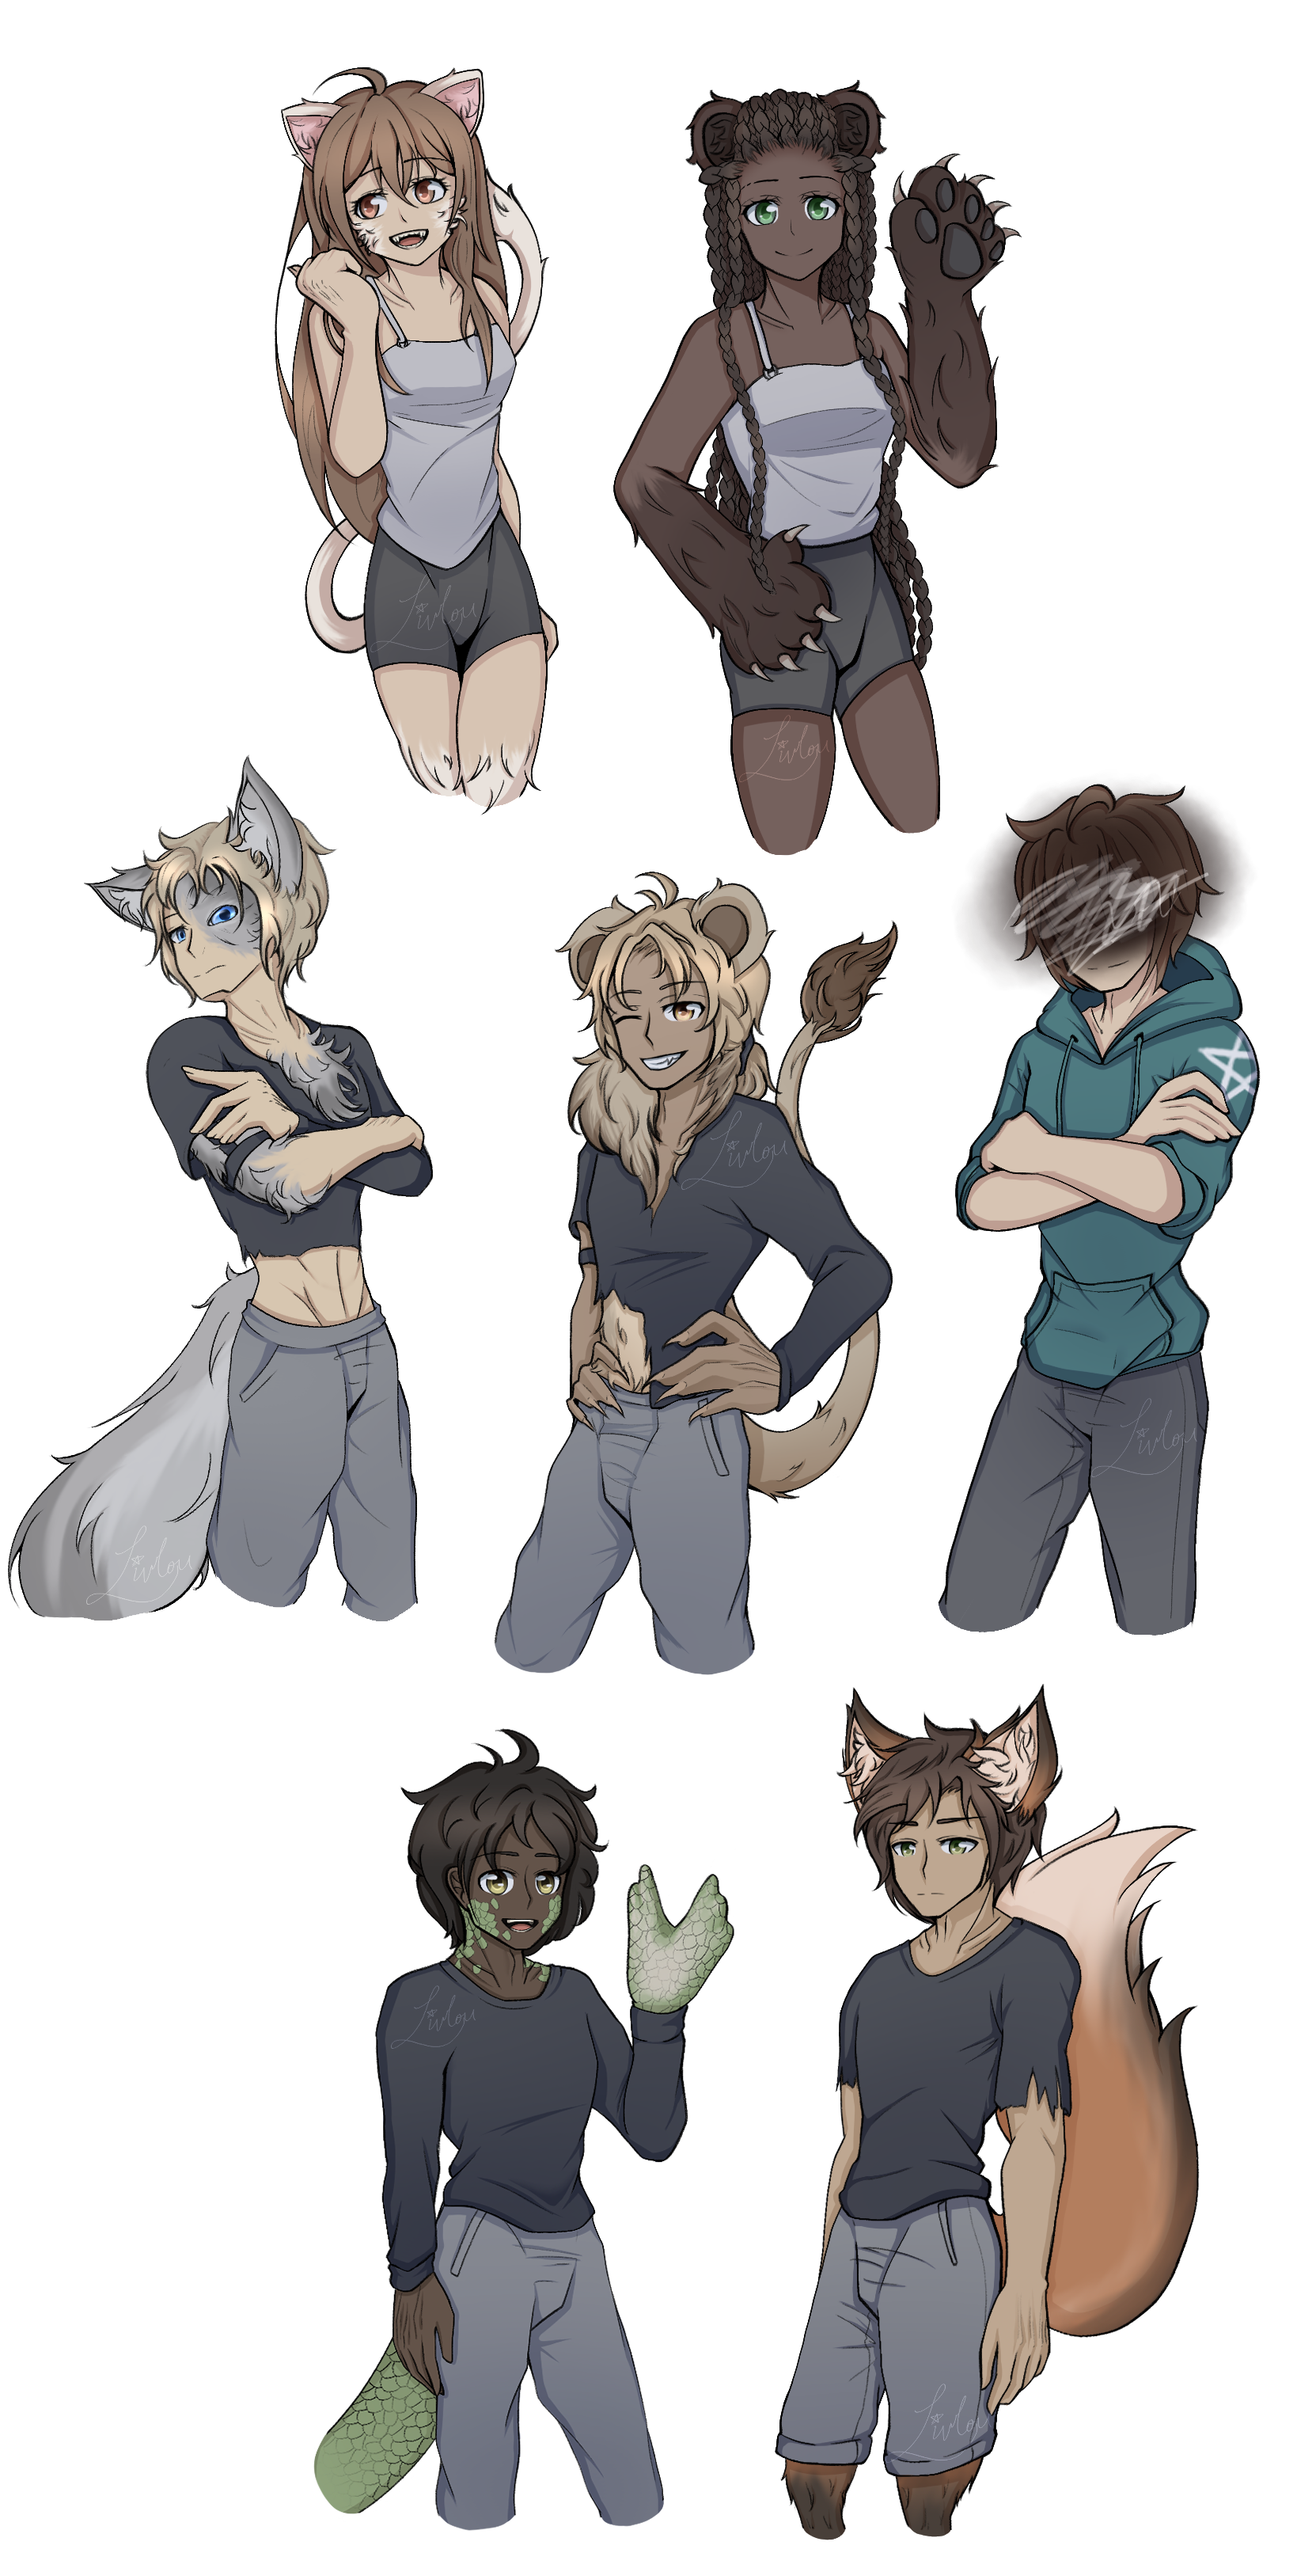 Annaliese (top left), Leah (top right), Cory (middle left), Theo (middle middle), Anthony (middle right), Elias (bottom left), Arthur (bottom right)